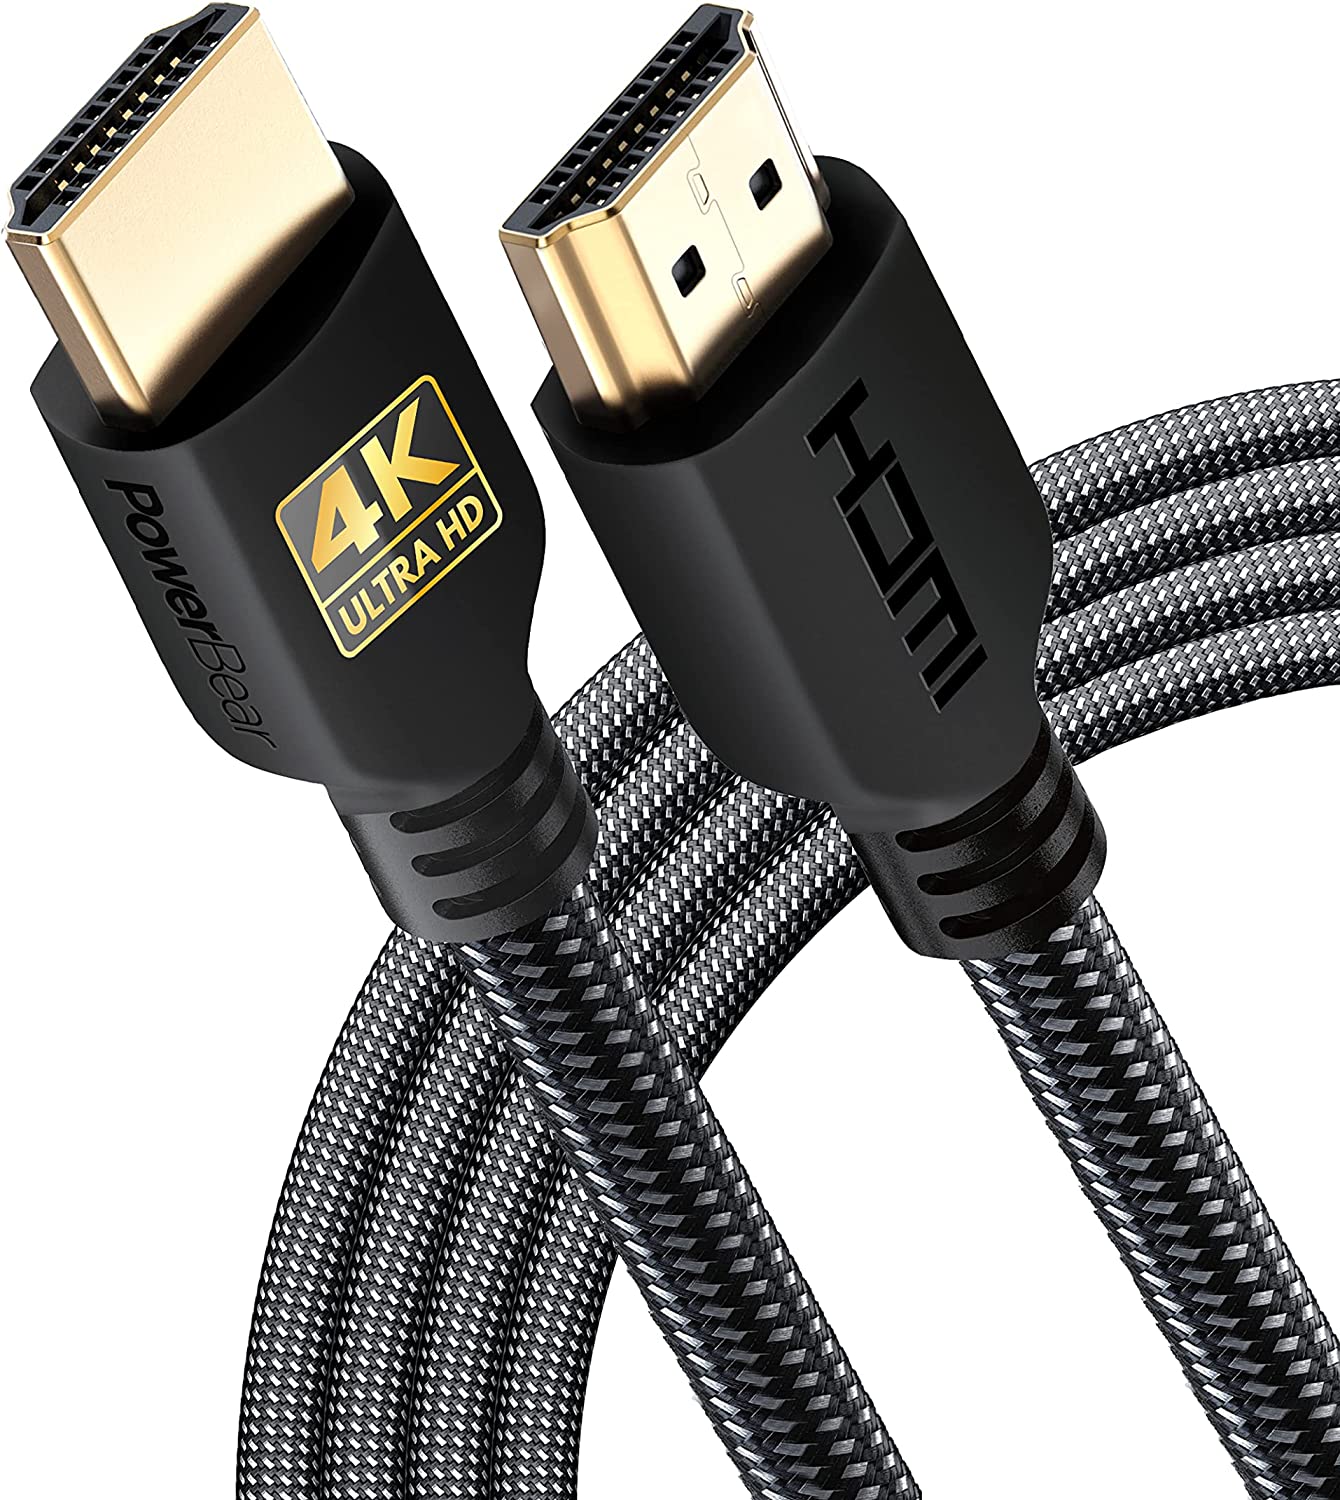 PowerBear 4K HDMI Cable 10 ft | High Speed Hdmi [...]